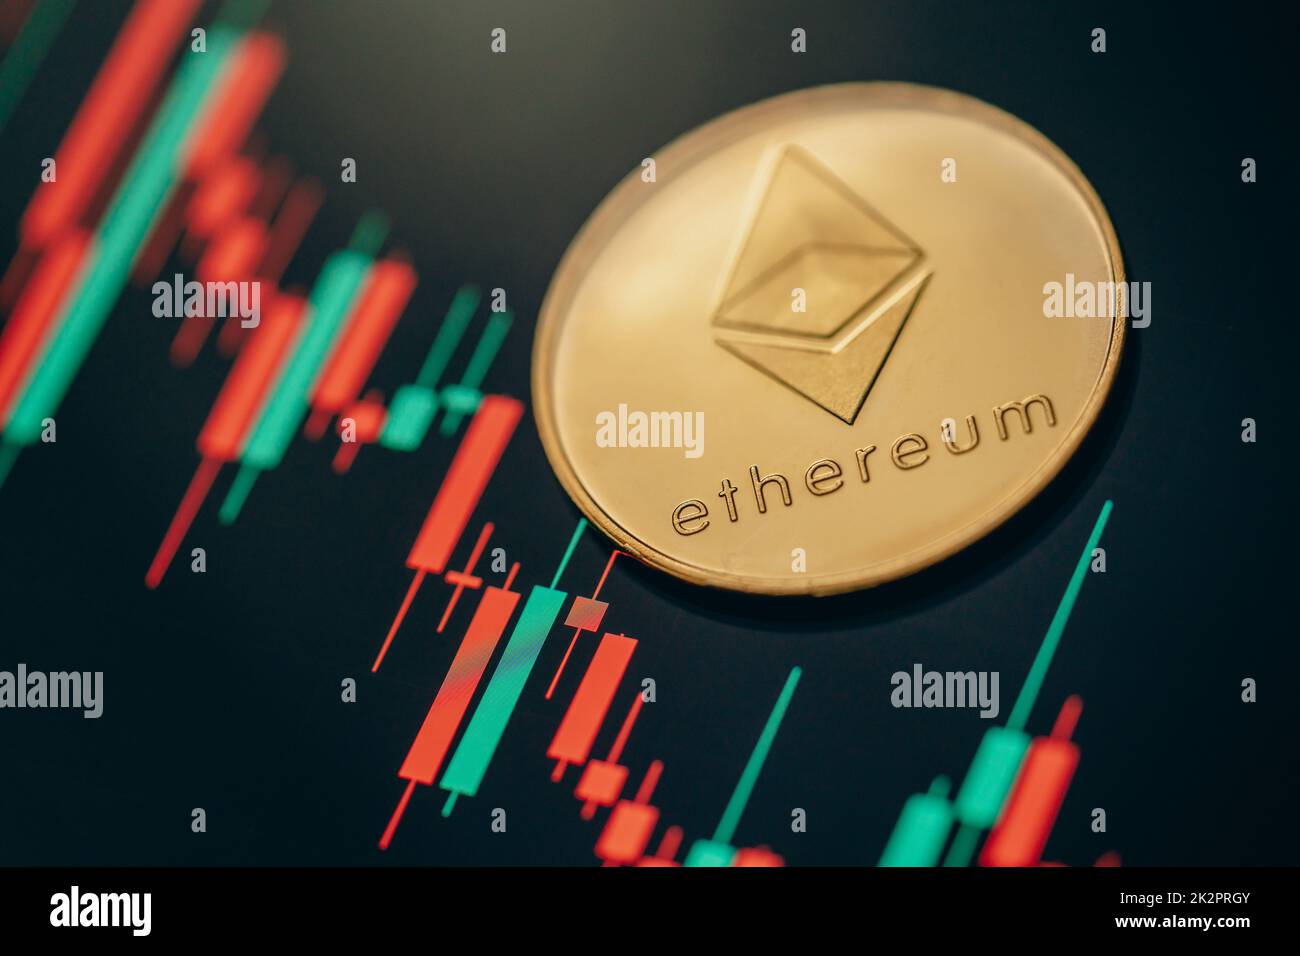 Gold Ethereum cryptocurrency coin with candle stick graph chart and digital background. Stock Photo